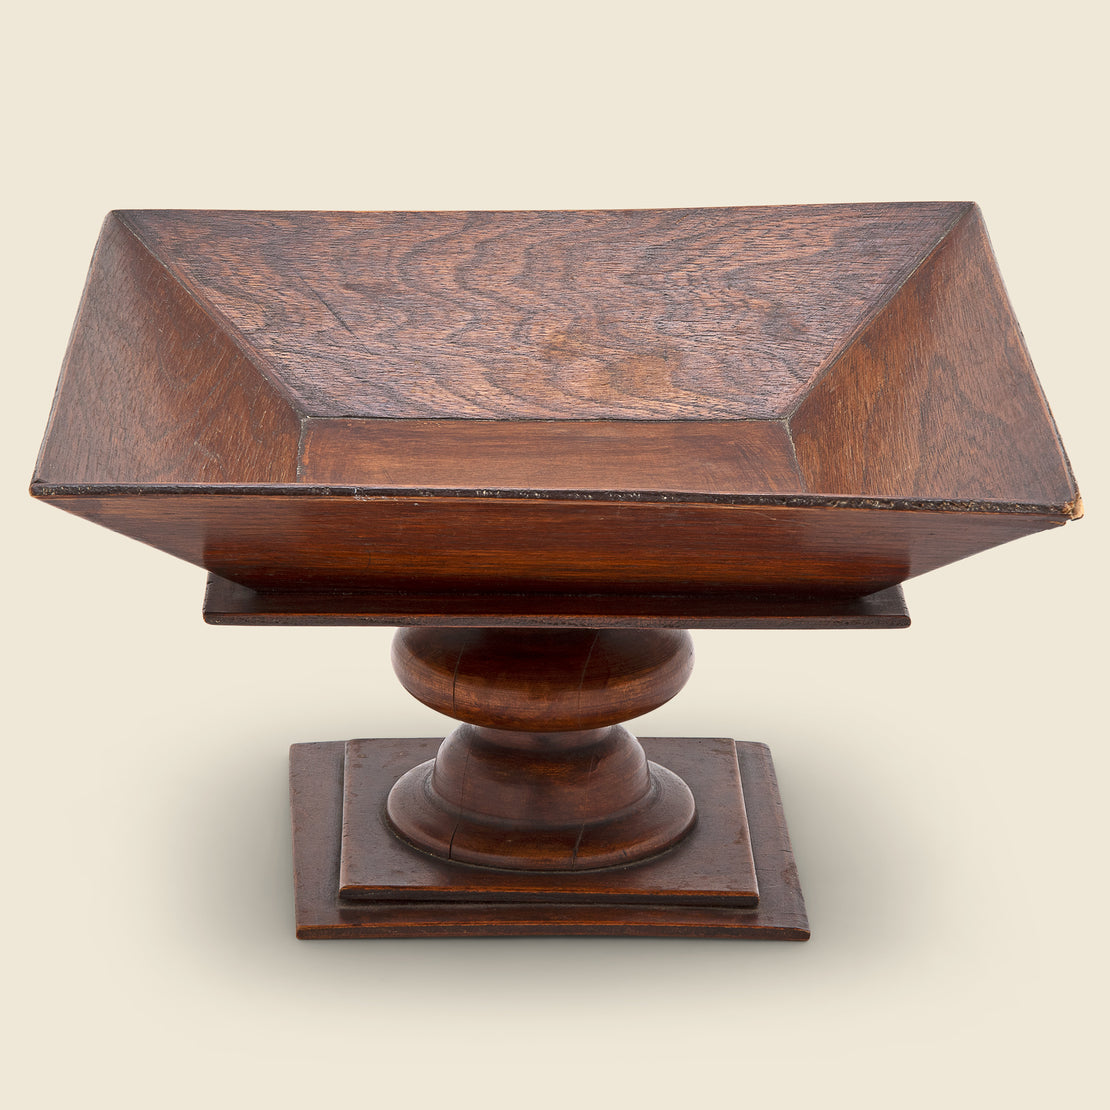 Vintage Large Square Wooden Compote